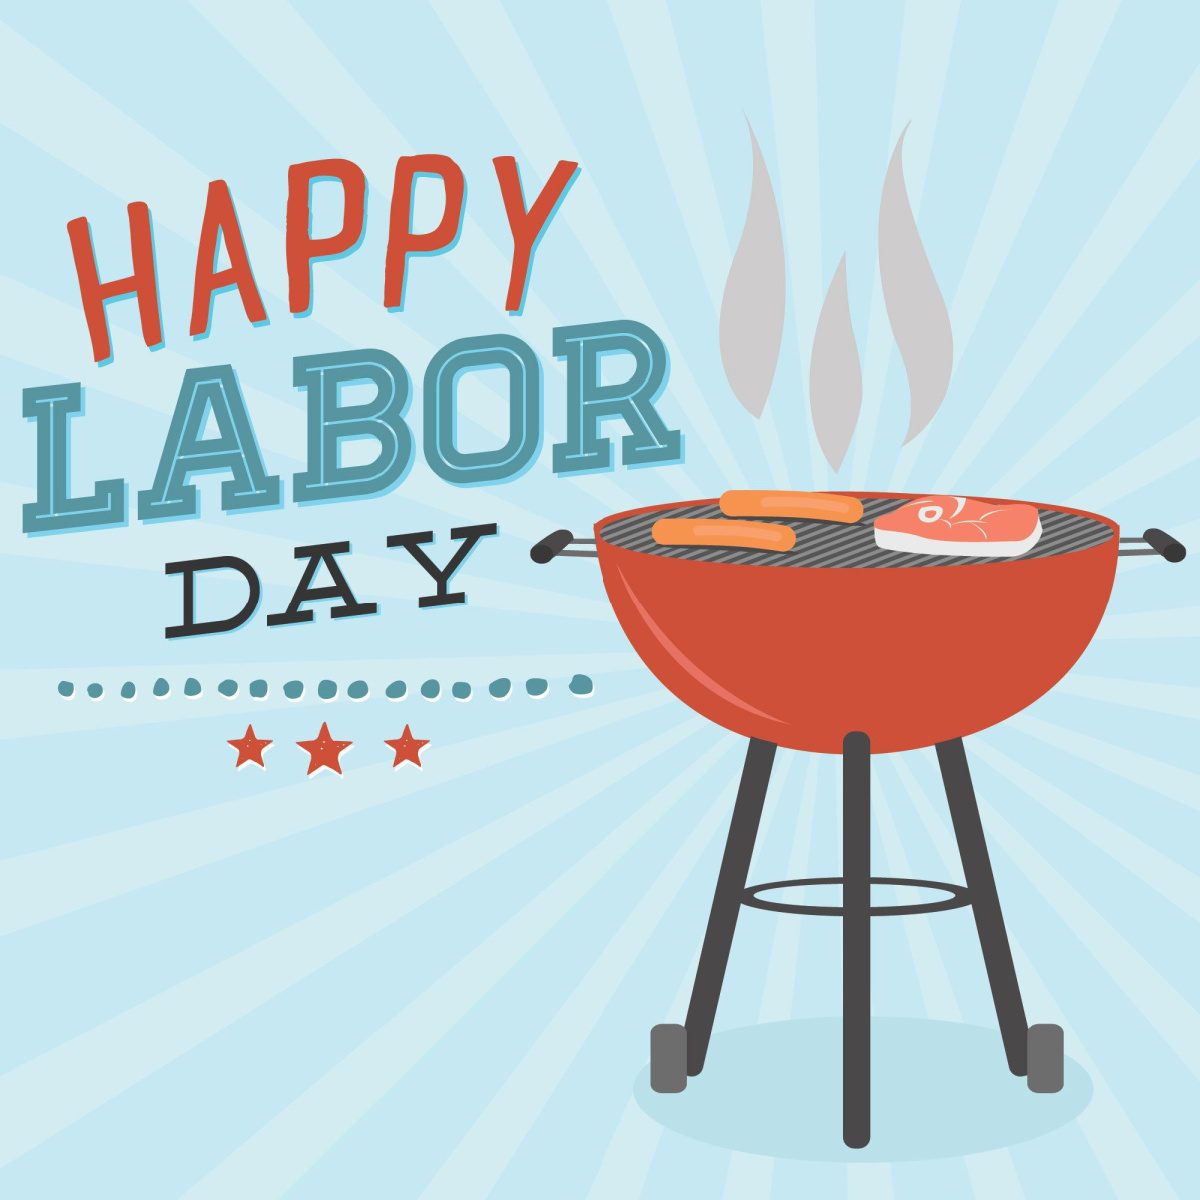 A blue background with vector image of a barbecue grill for labor day with hotdogs and a steak on the grill plate with the text "Happy Labor Day" beside it.